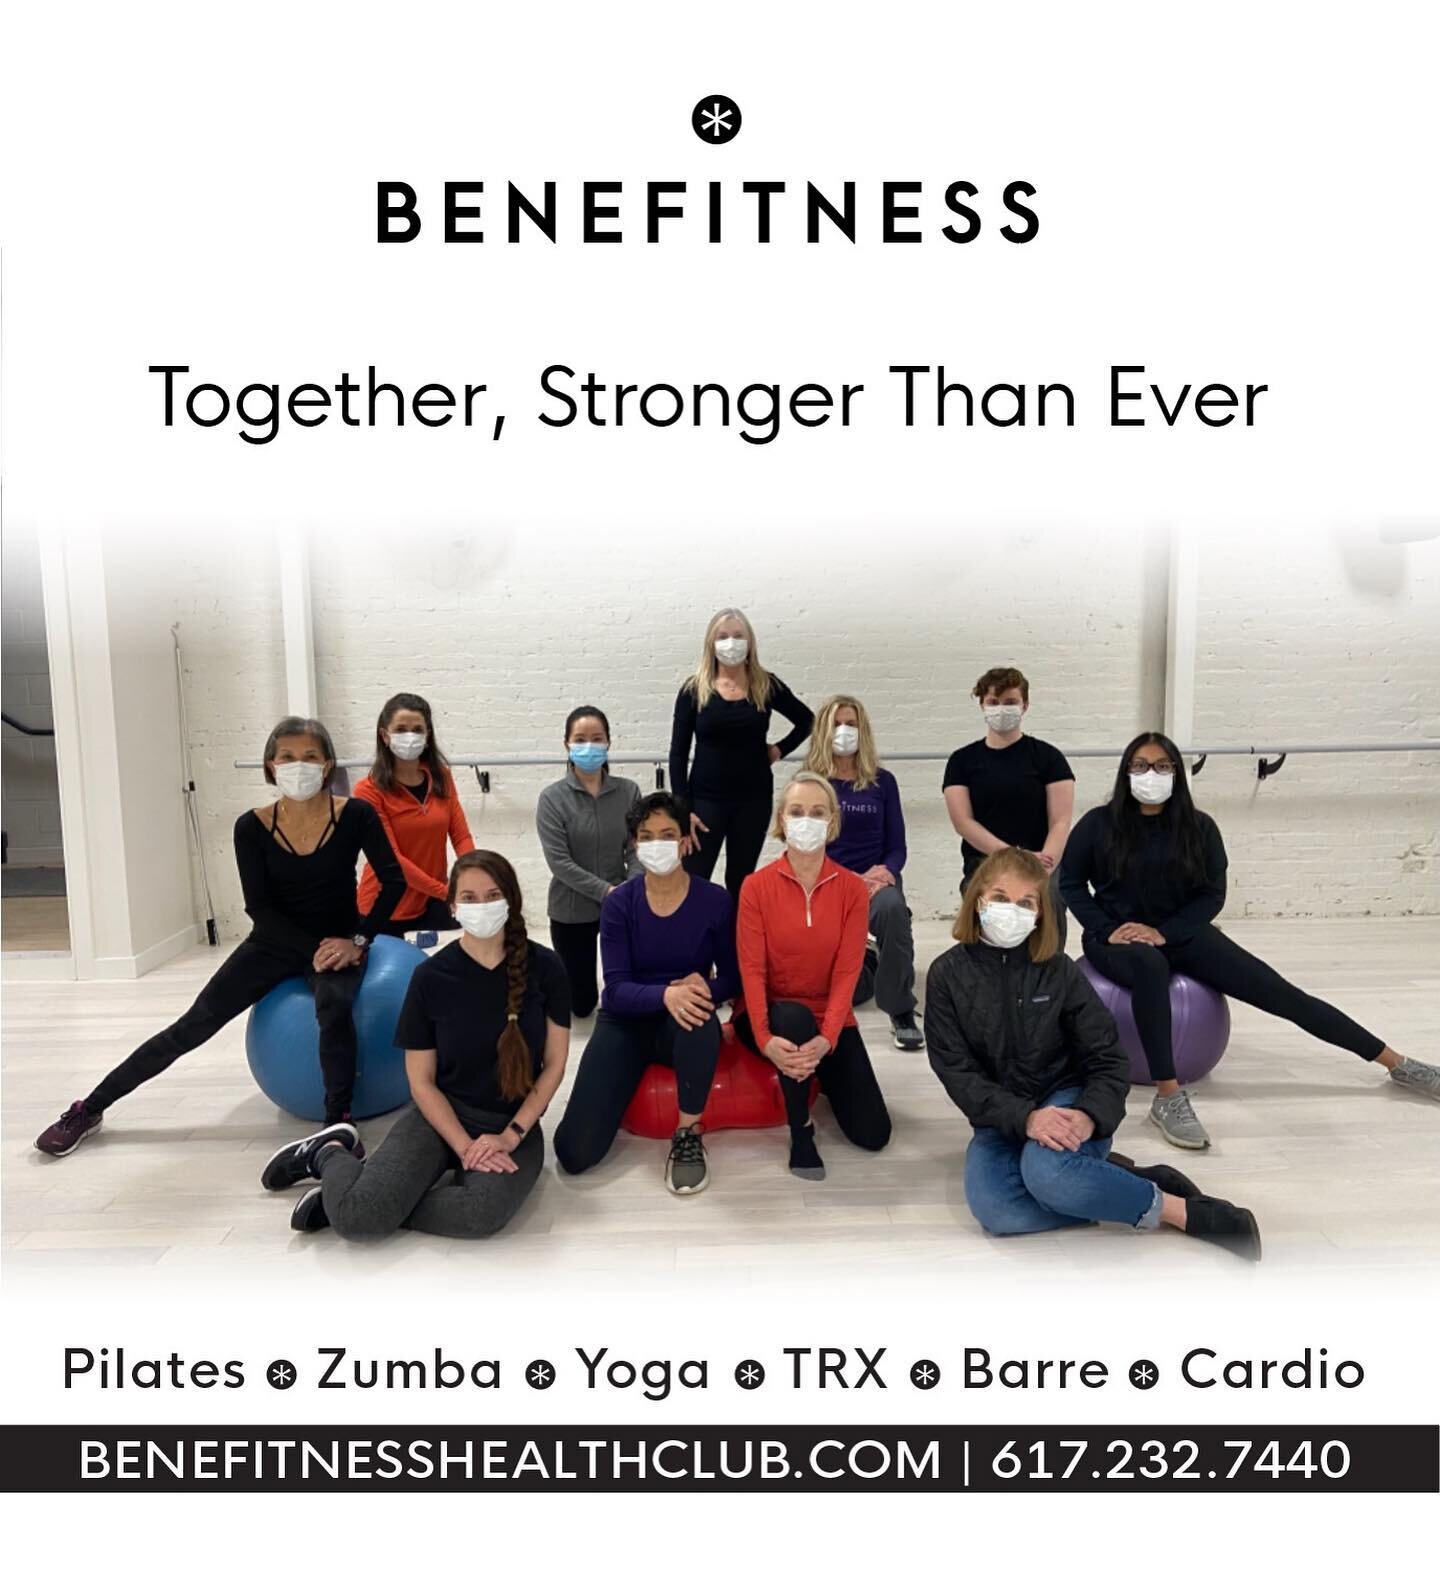 All your favorite Benefitness trainers and instructors are here for you! Join us virtually or in the club for daily classes, personal training sessions and more! 
Visit us at Benefitnesshealthclub.com for more information